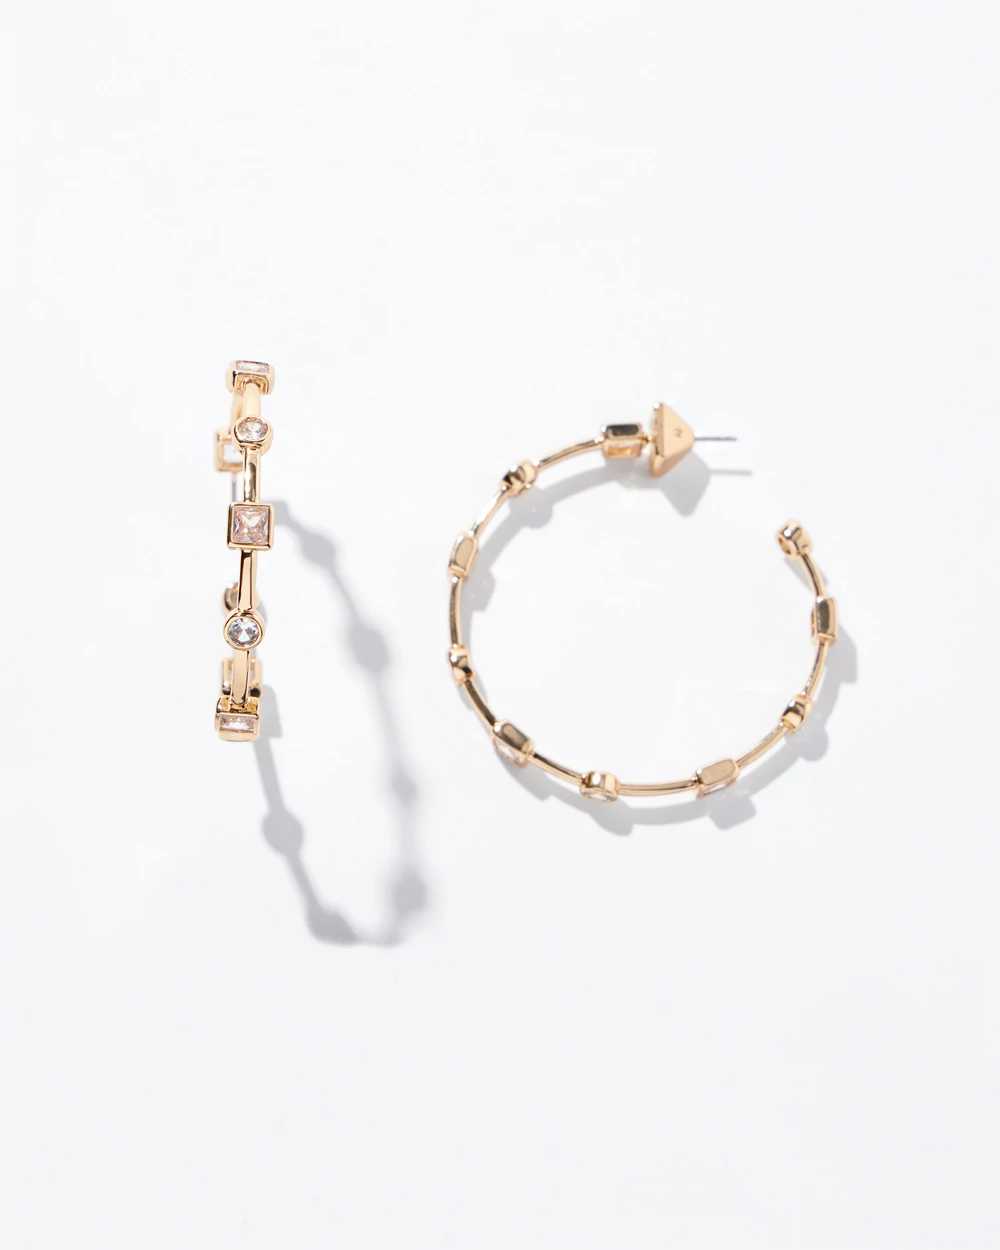 Gold Cubic Zirconia Bezel Hoops click to view larger image.